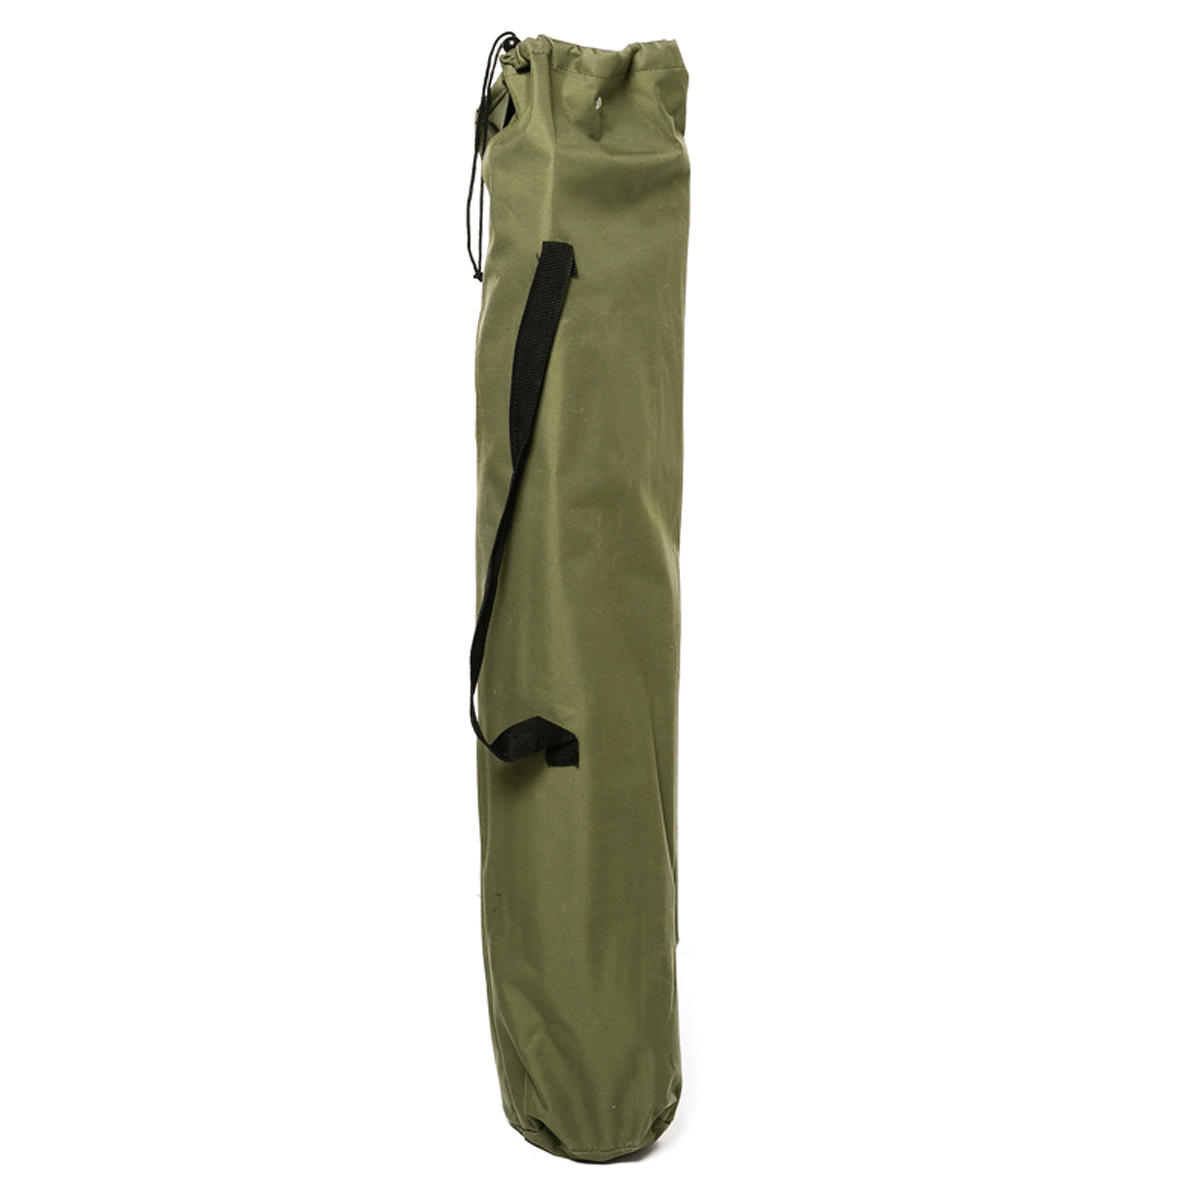 Camping Bed with Bag in Green 190 x 65 x 42cm